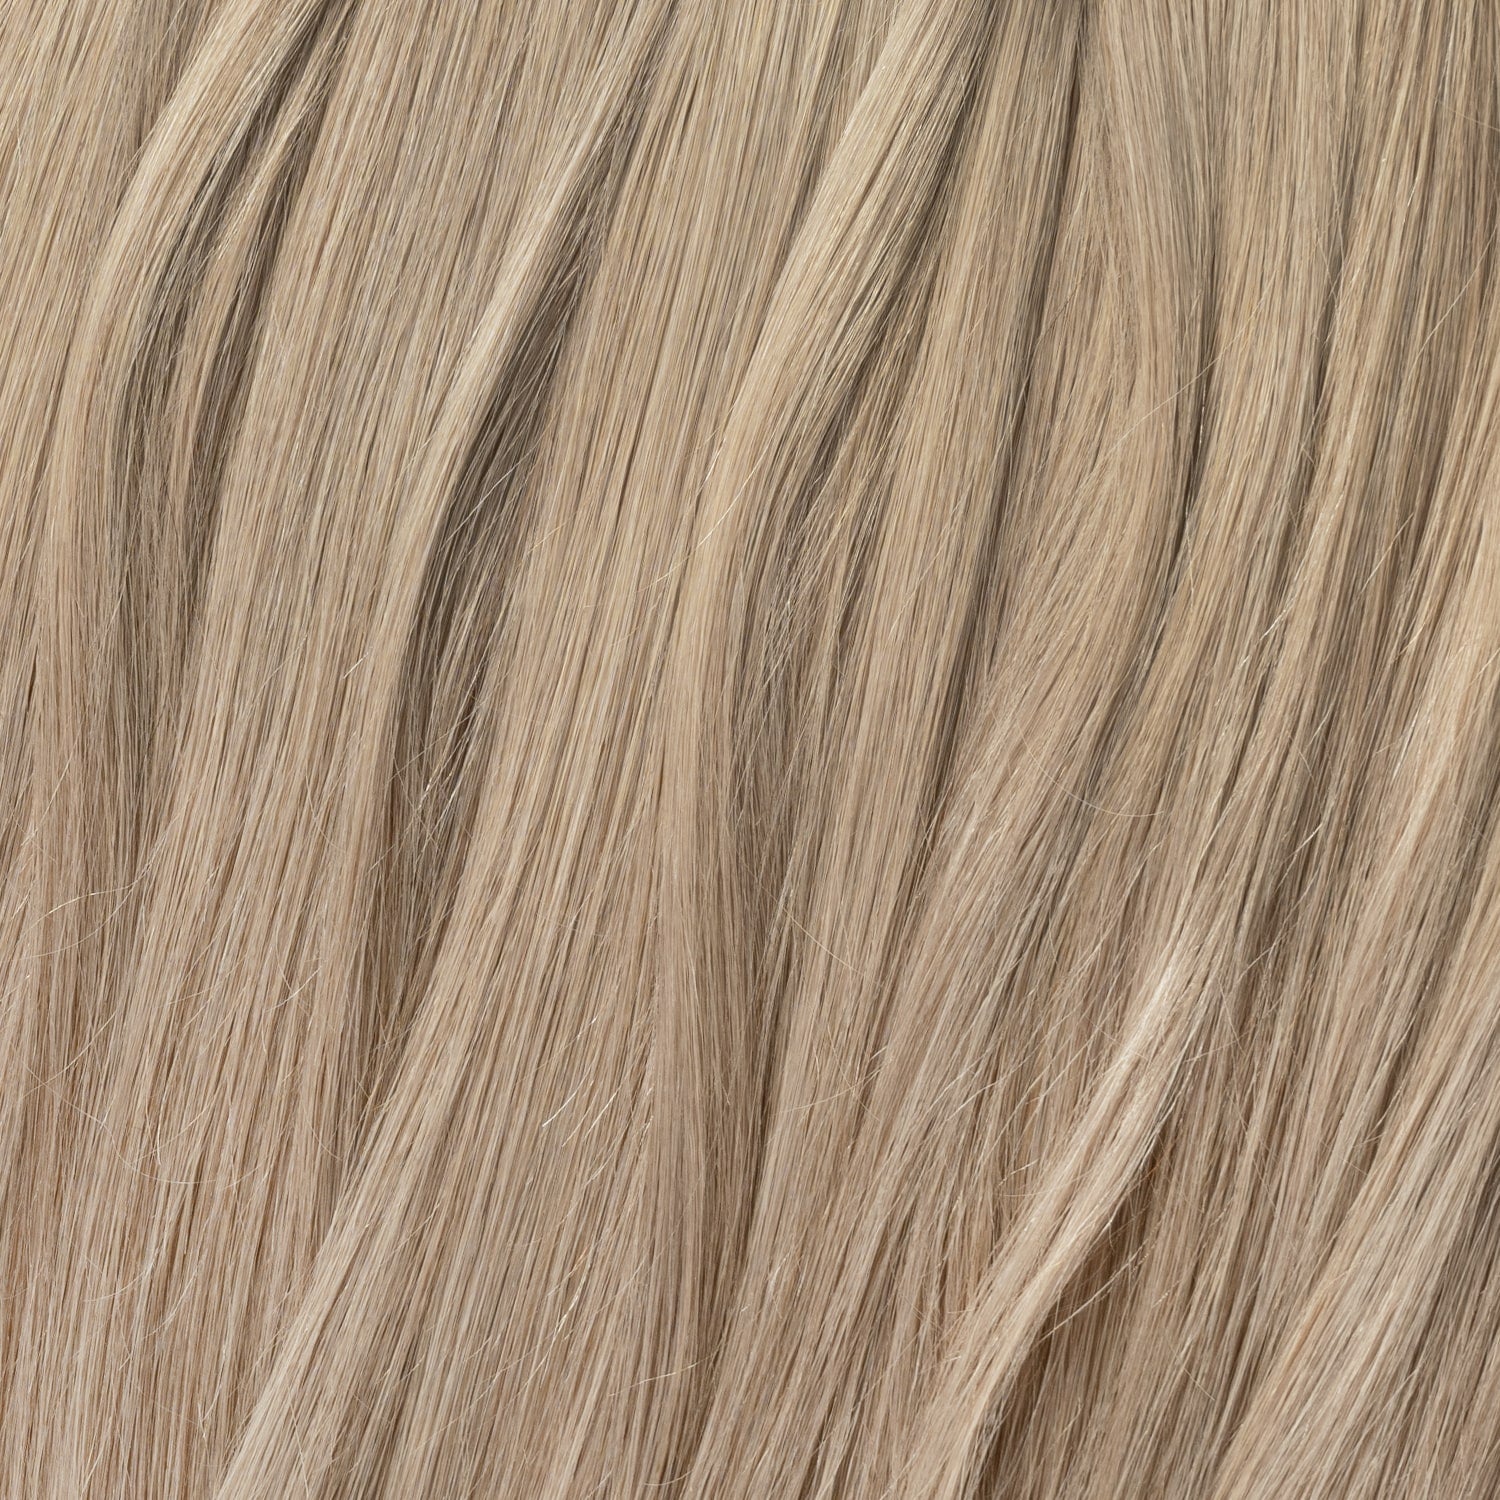 Tape extensions - Ash Blonde 17B